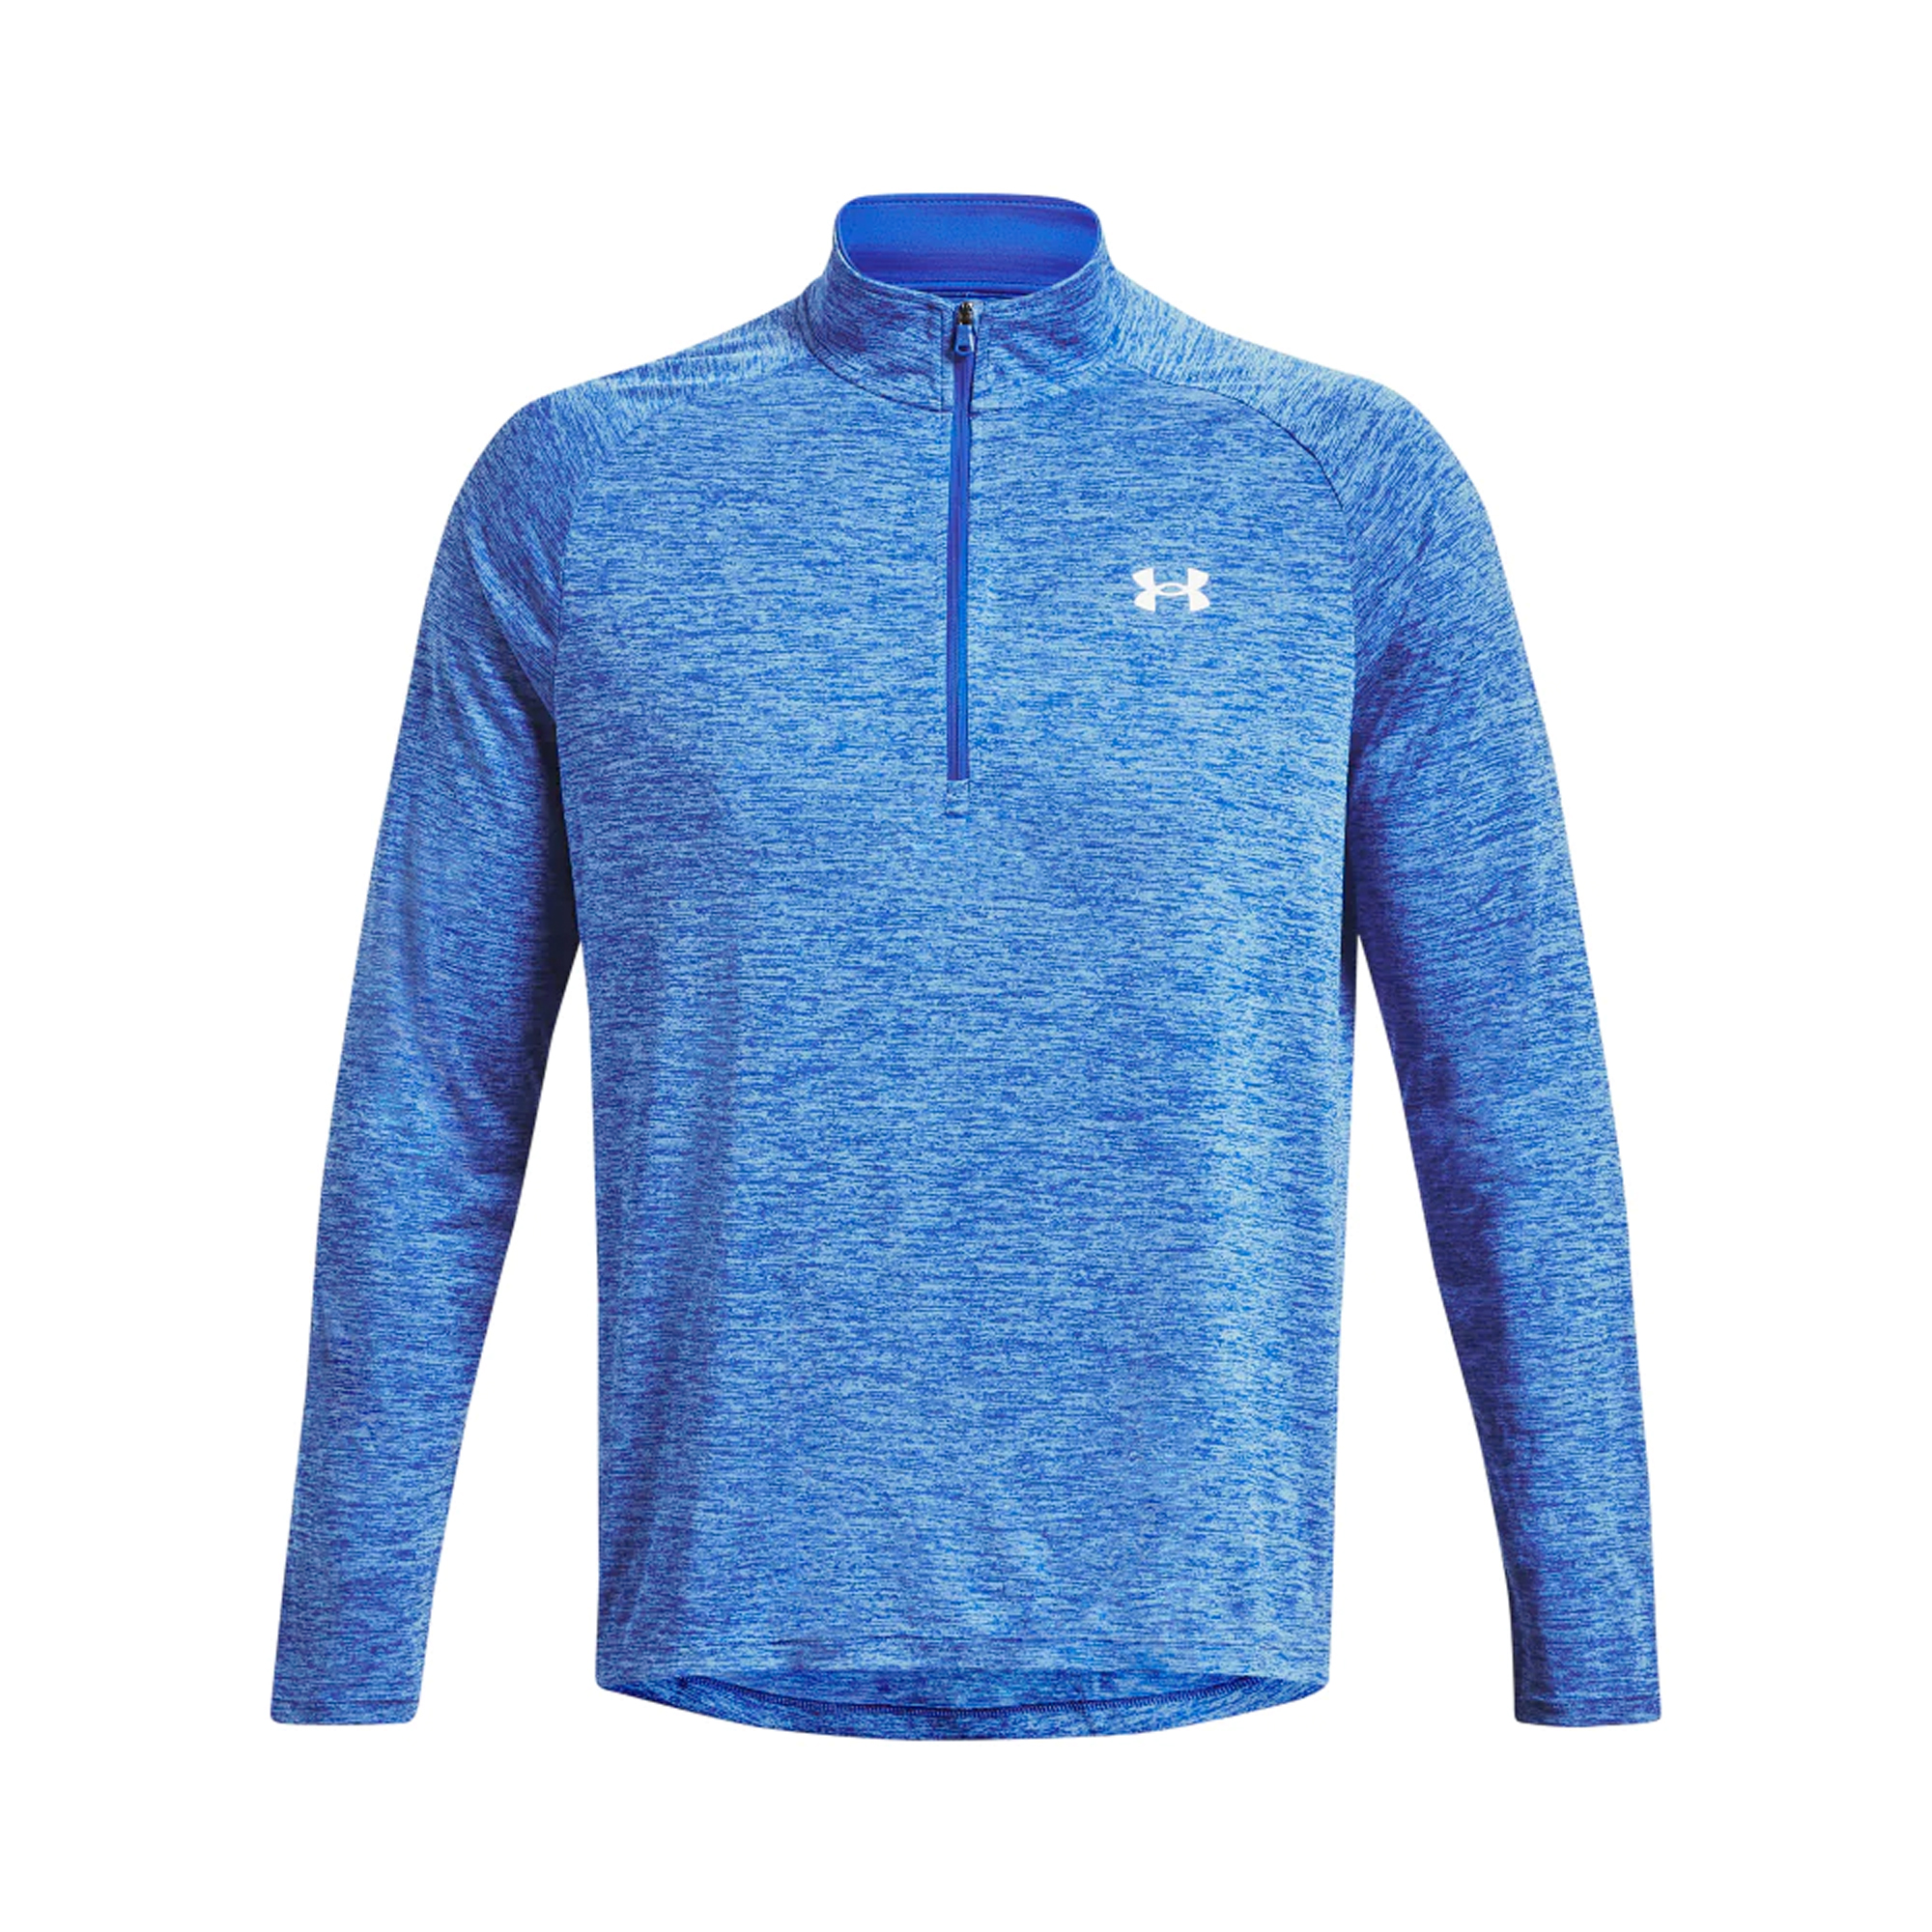 Under Armour Mens UA Tech 2.0 1/2 Zip Breathable Sweater Sports Top |  Scratch72